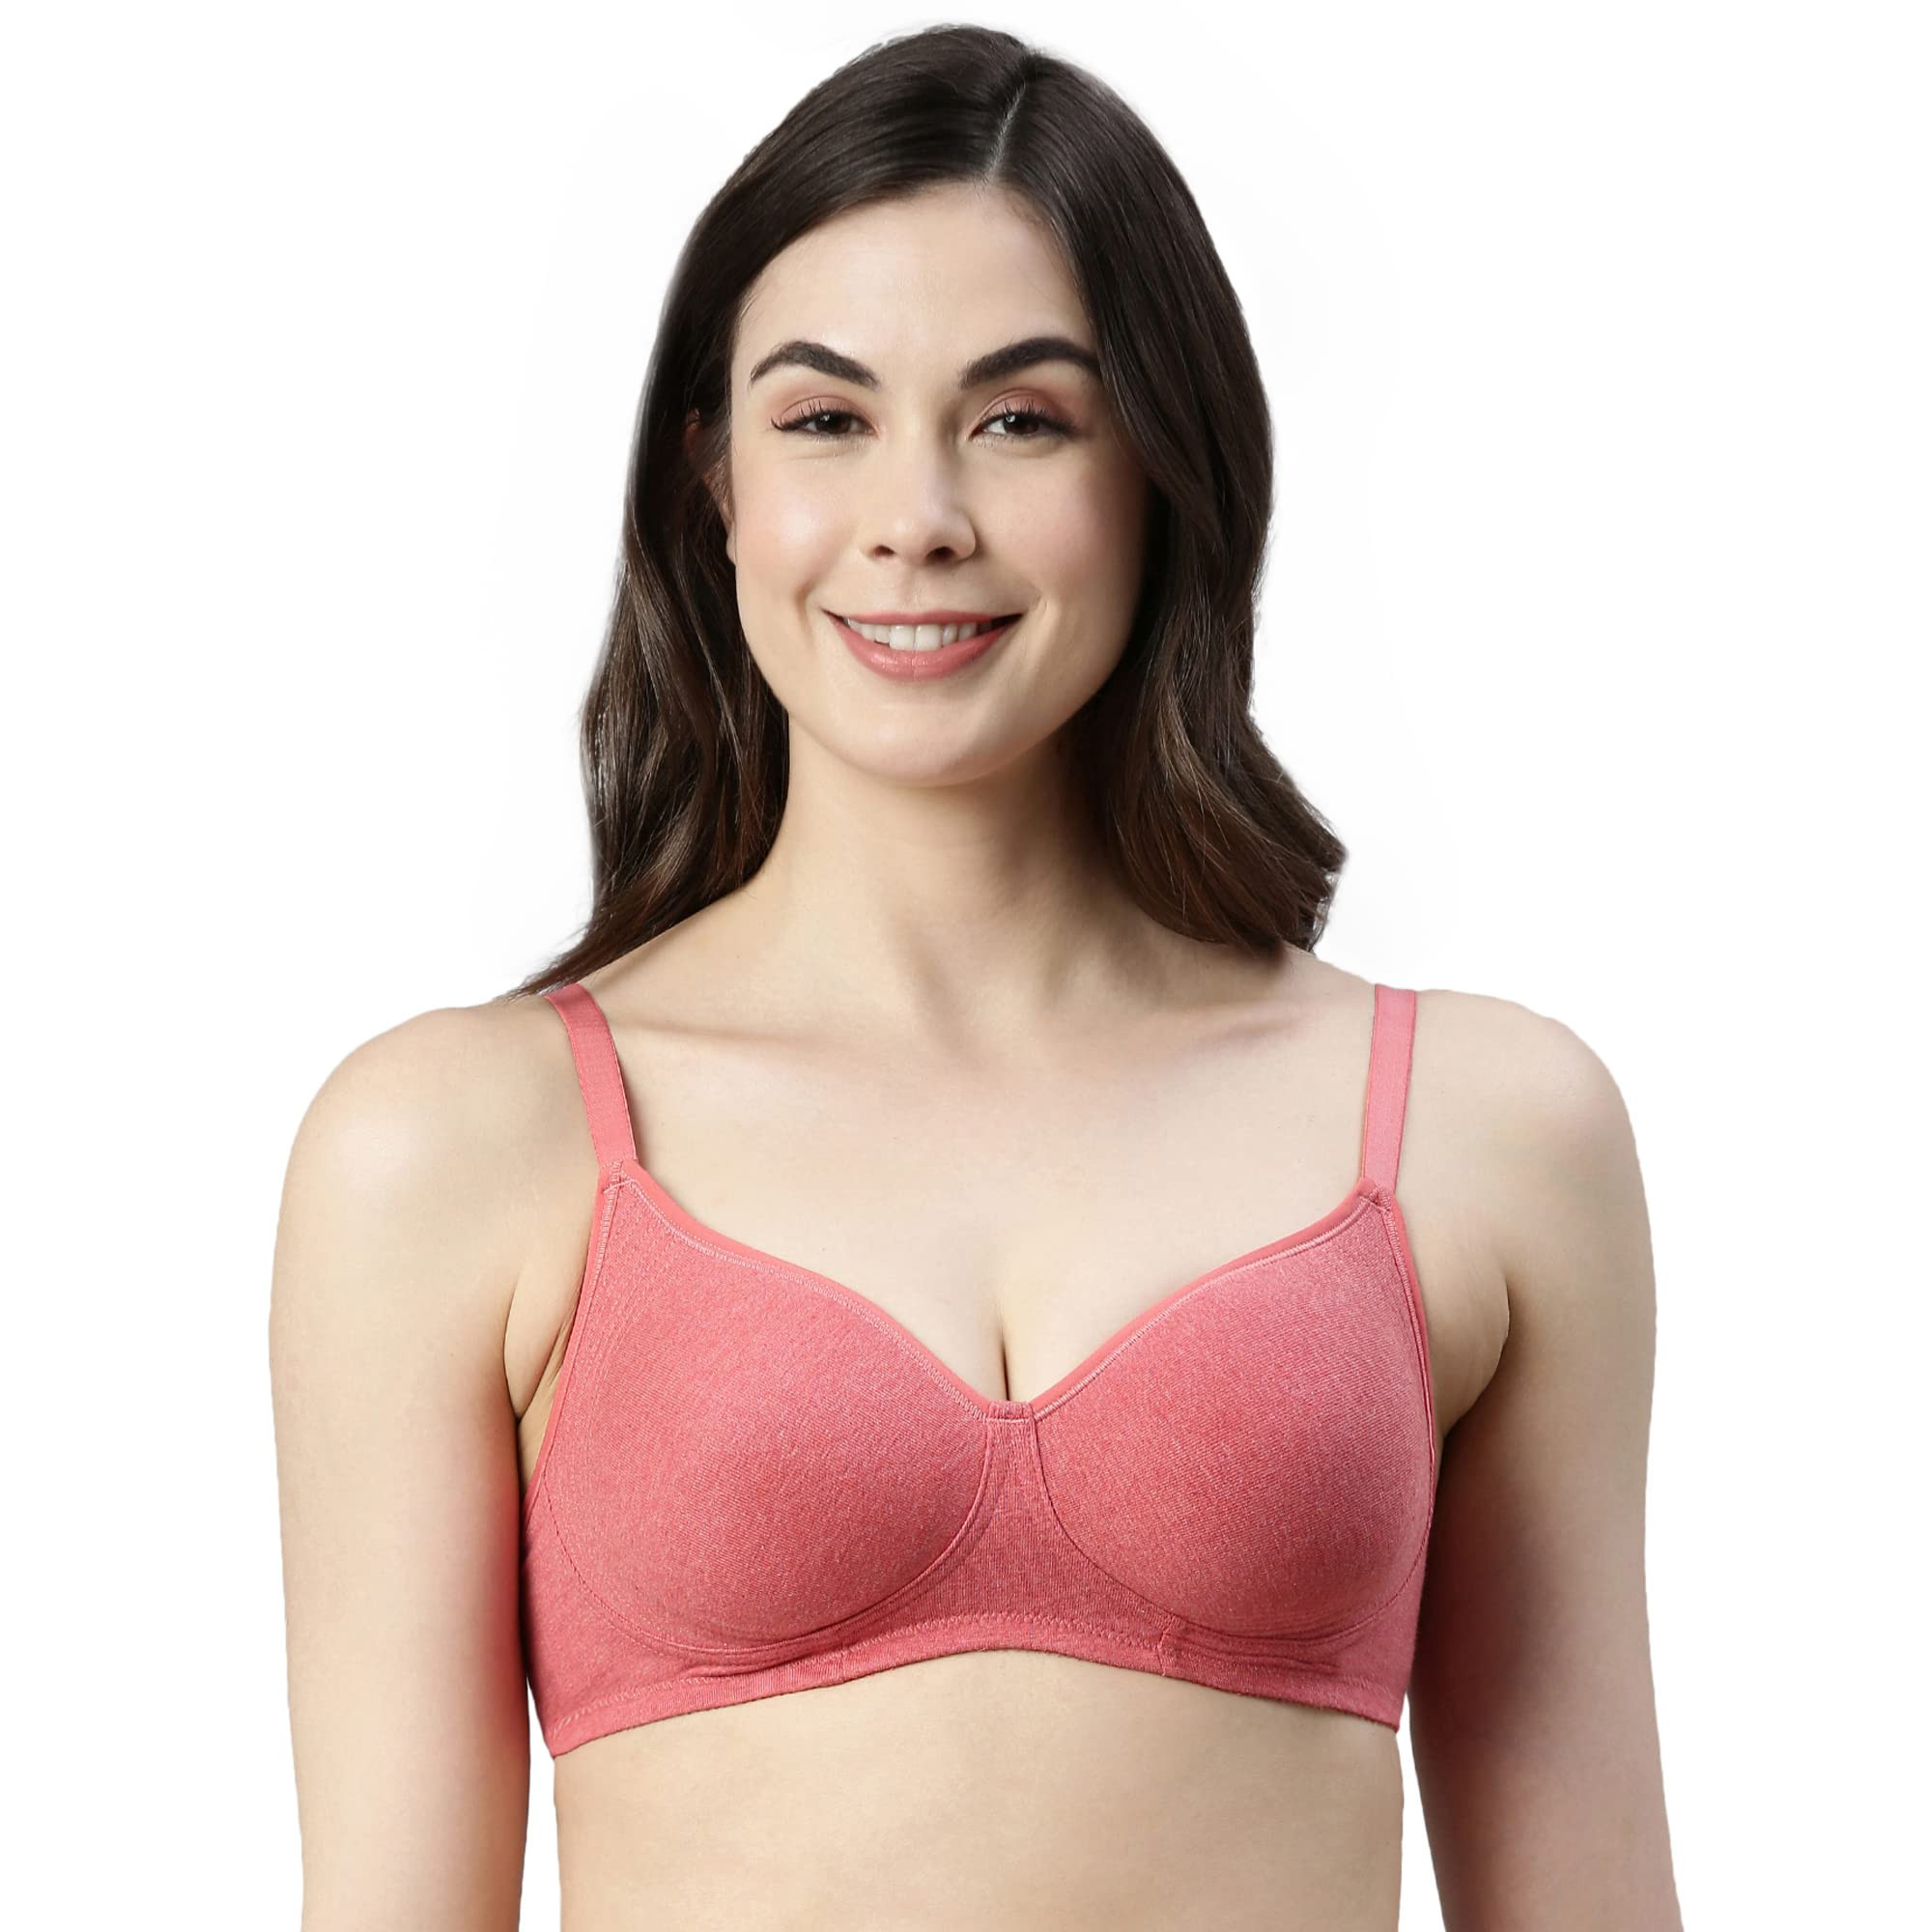 https://www.zebrs.com/uploads/zebrs/products/enamor-a042-side-support-shaper-stretch-cotton-everyday-bra---non-padded-wire-free-amp-high-coveragesize-36d-74156312425342_l.jpg